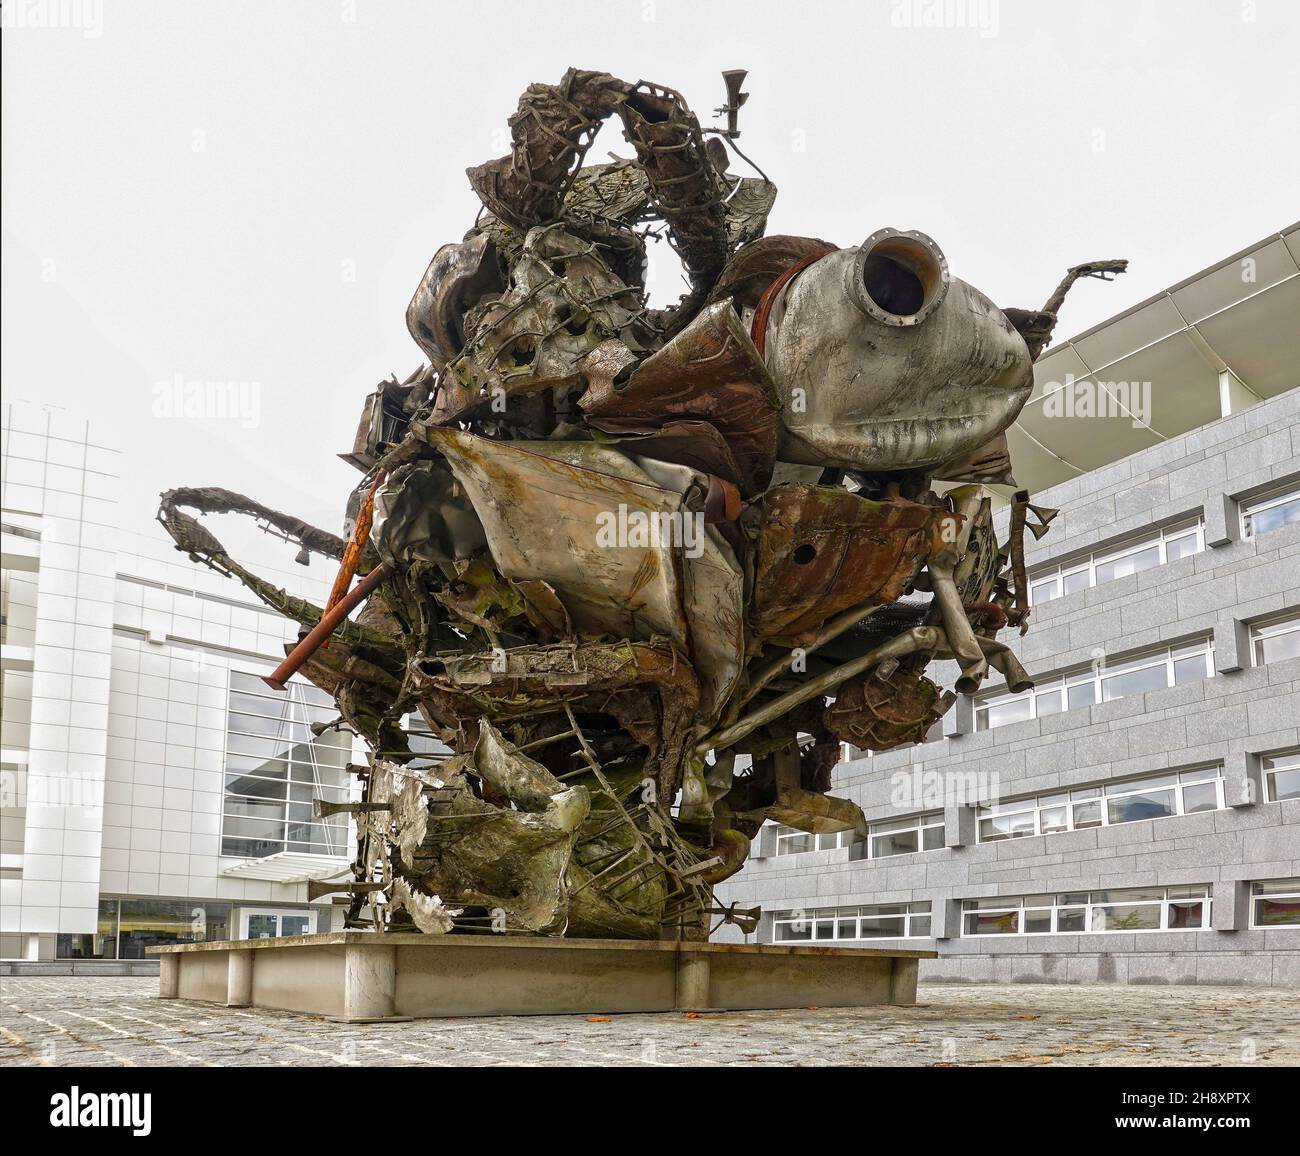 Luxembourg City, Luxembourg - September 2, 2020 – The Sarreguemines, a sculpture made from industrial recycled metal elements by the American artist F Stock Photo